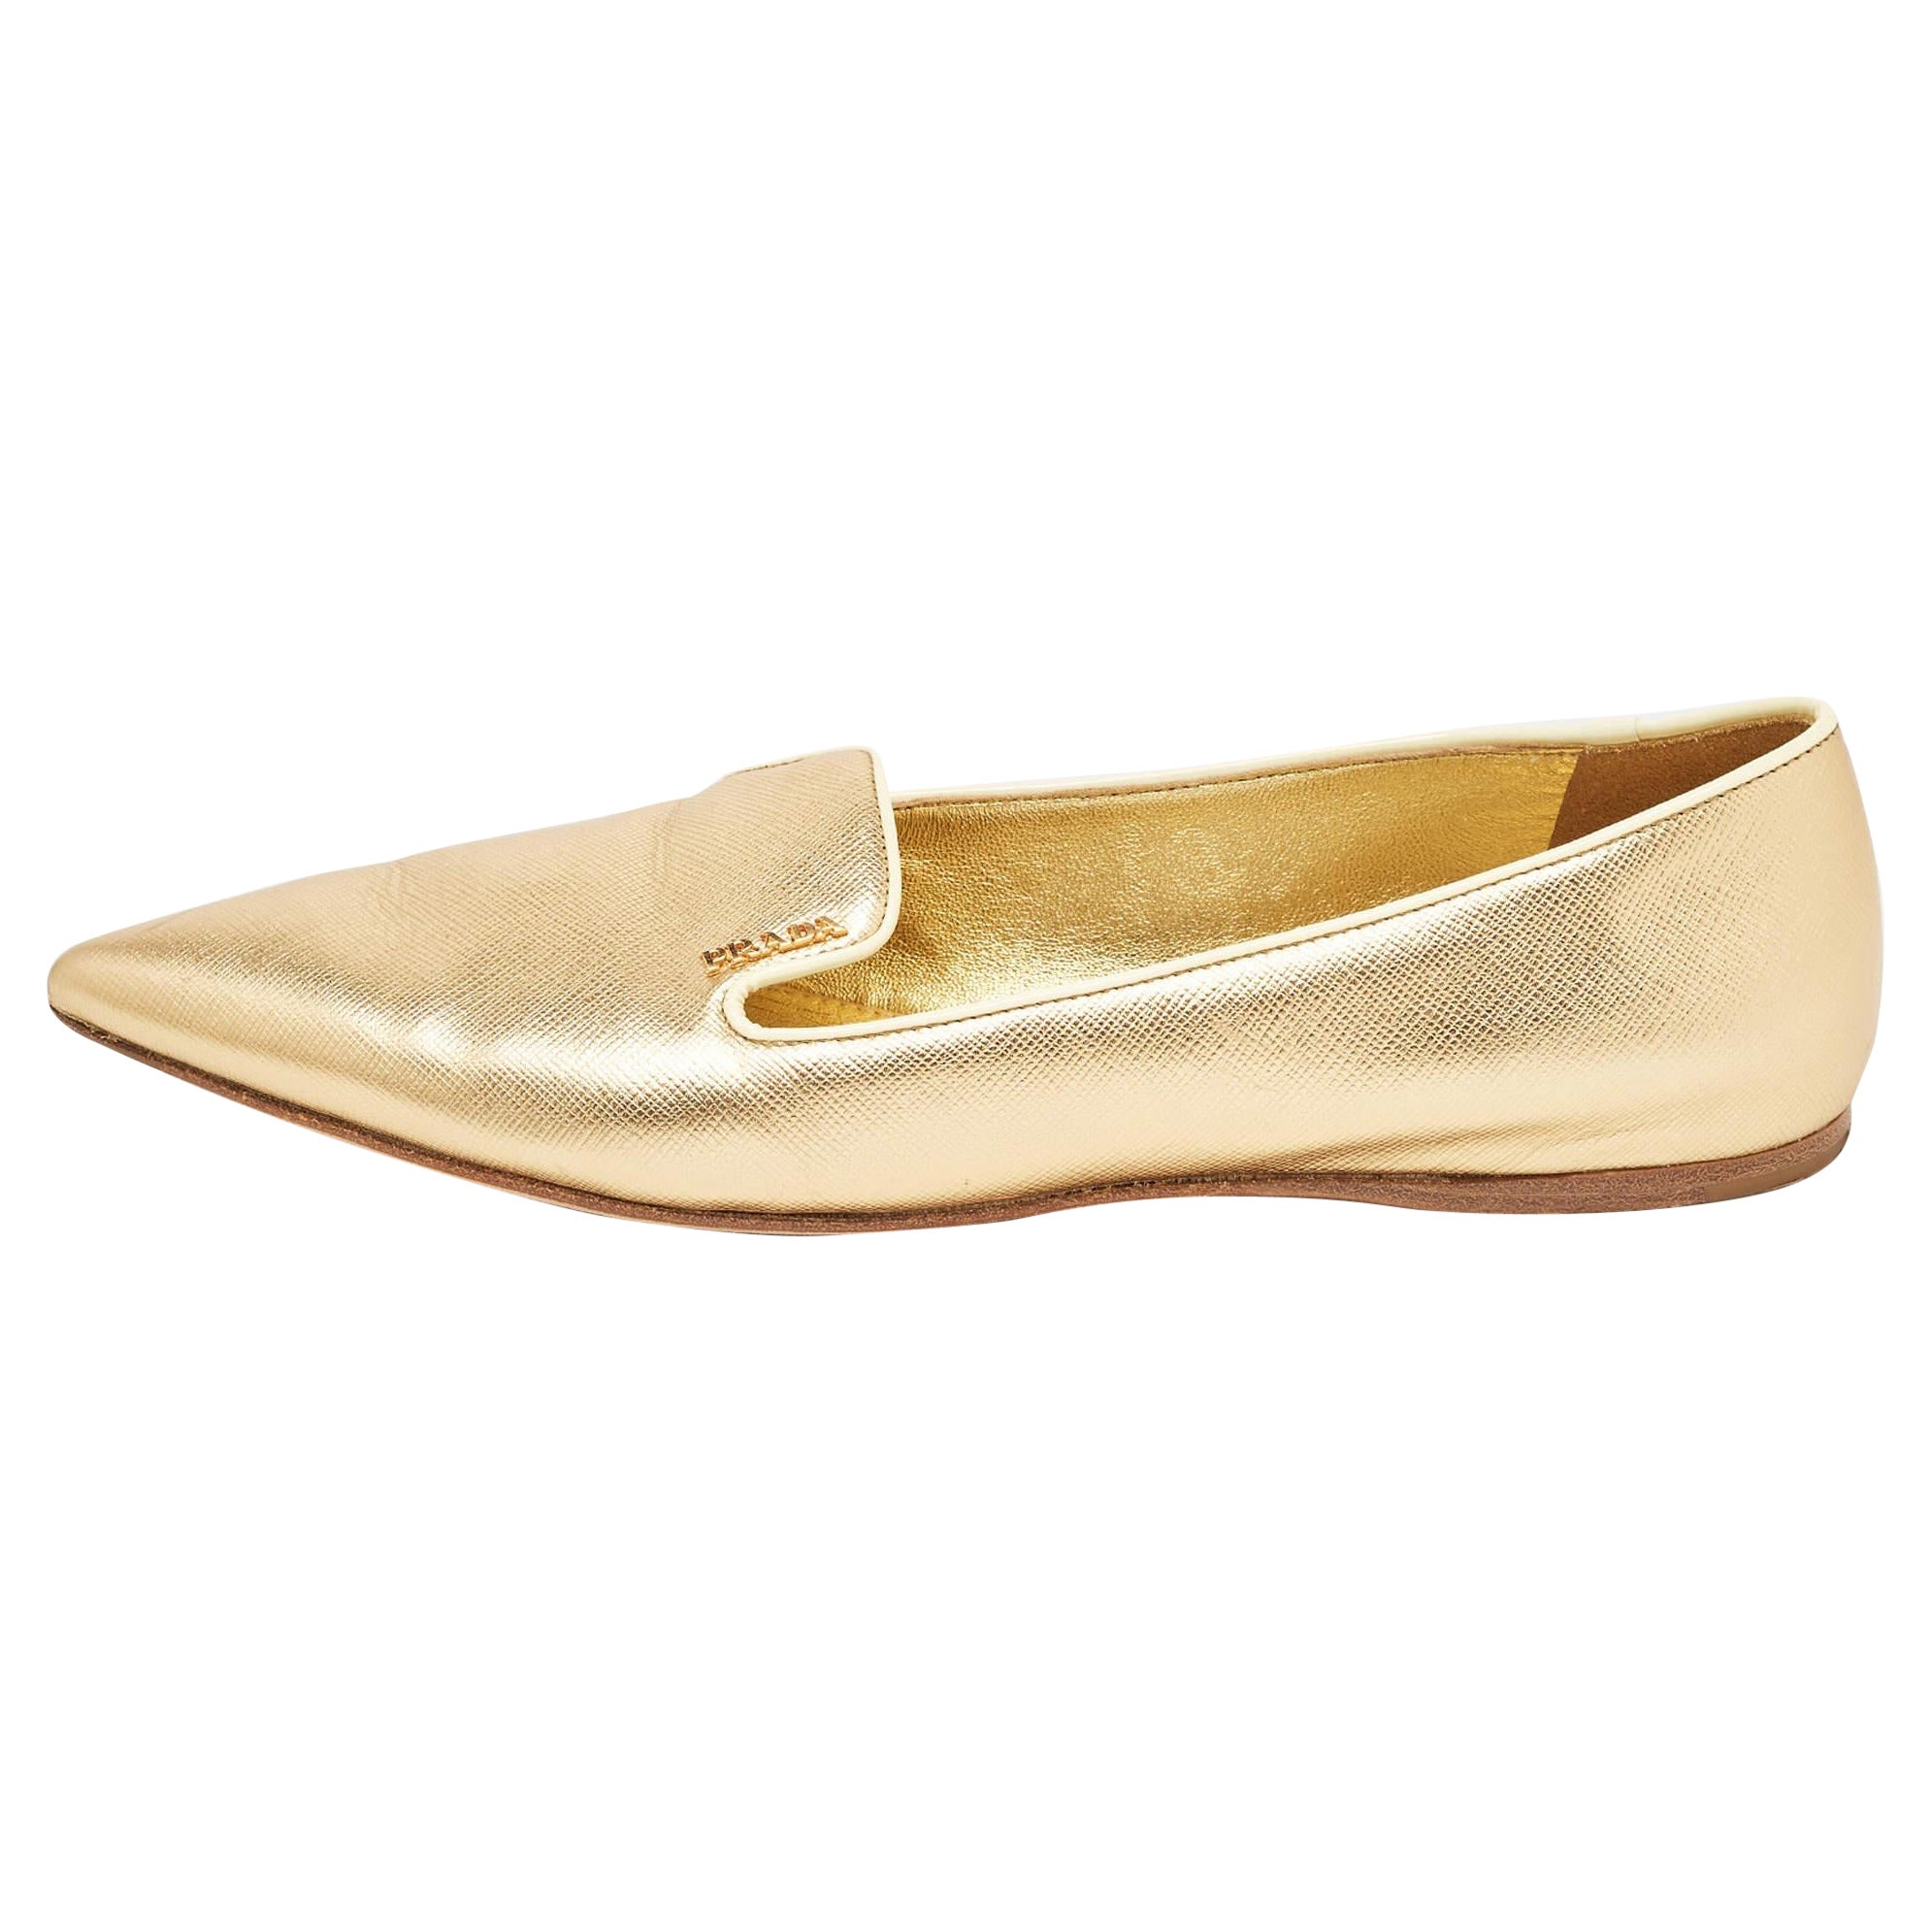 Prada Gold Saffiano Leather Pointed Toe Ballet Flats Size 38 For Sale